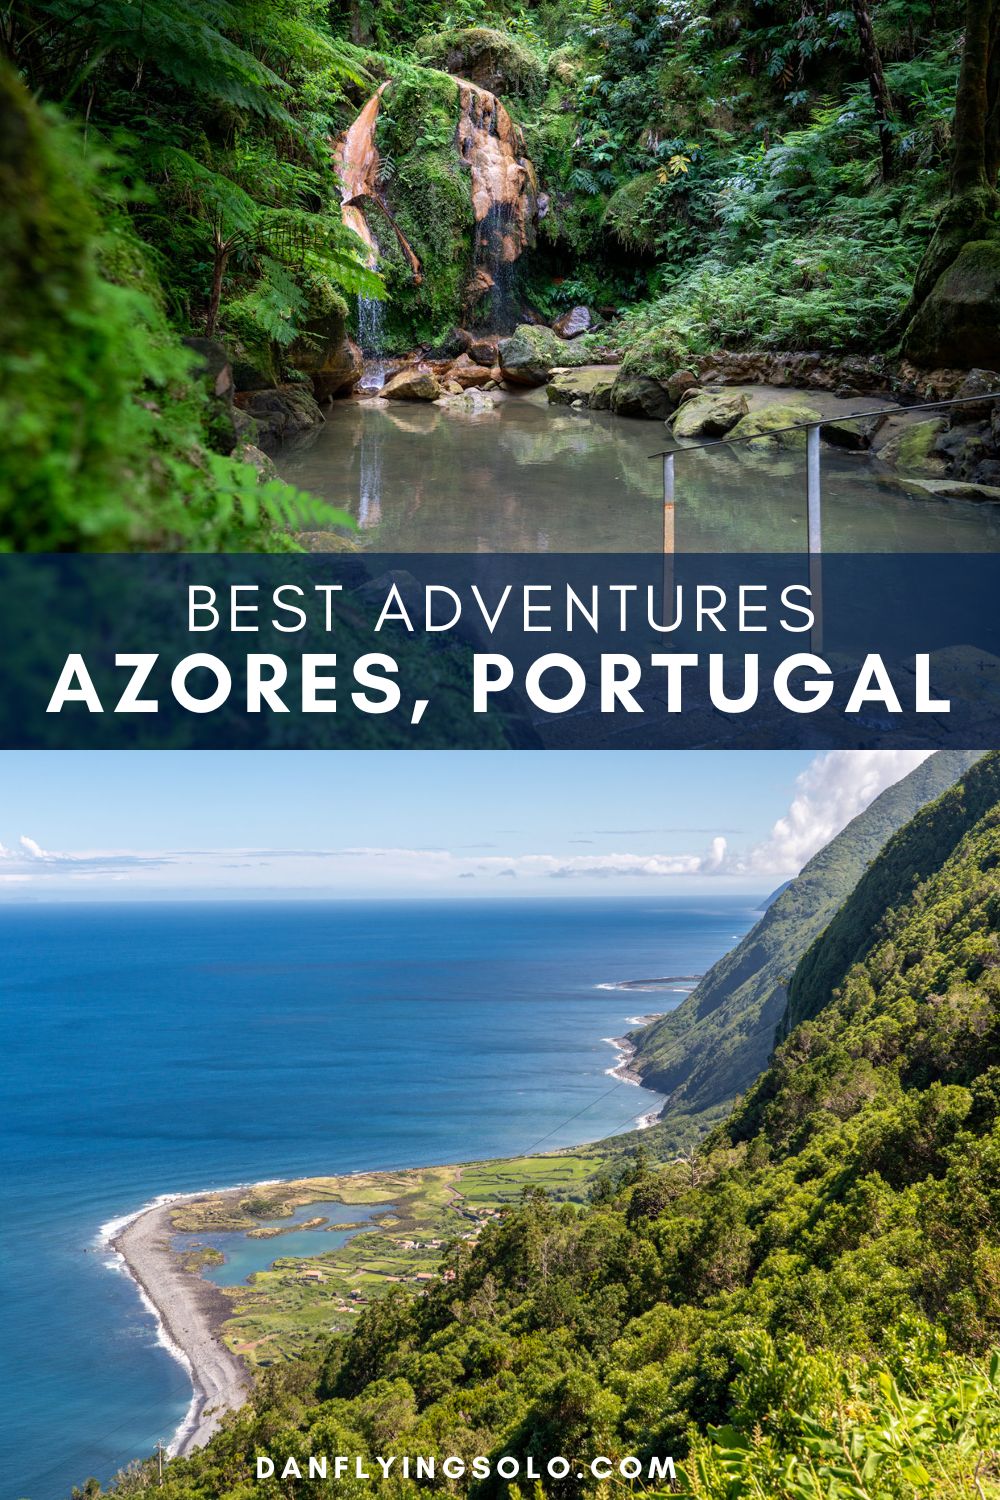 Seeking the best Azores adventure activities? Here are the top things to do in the Azores for outdoor adventures across Portugal's Eden-like archipelago.